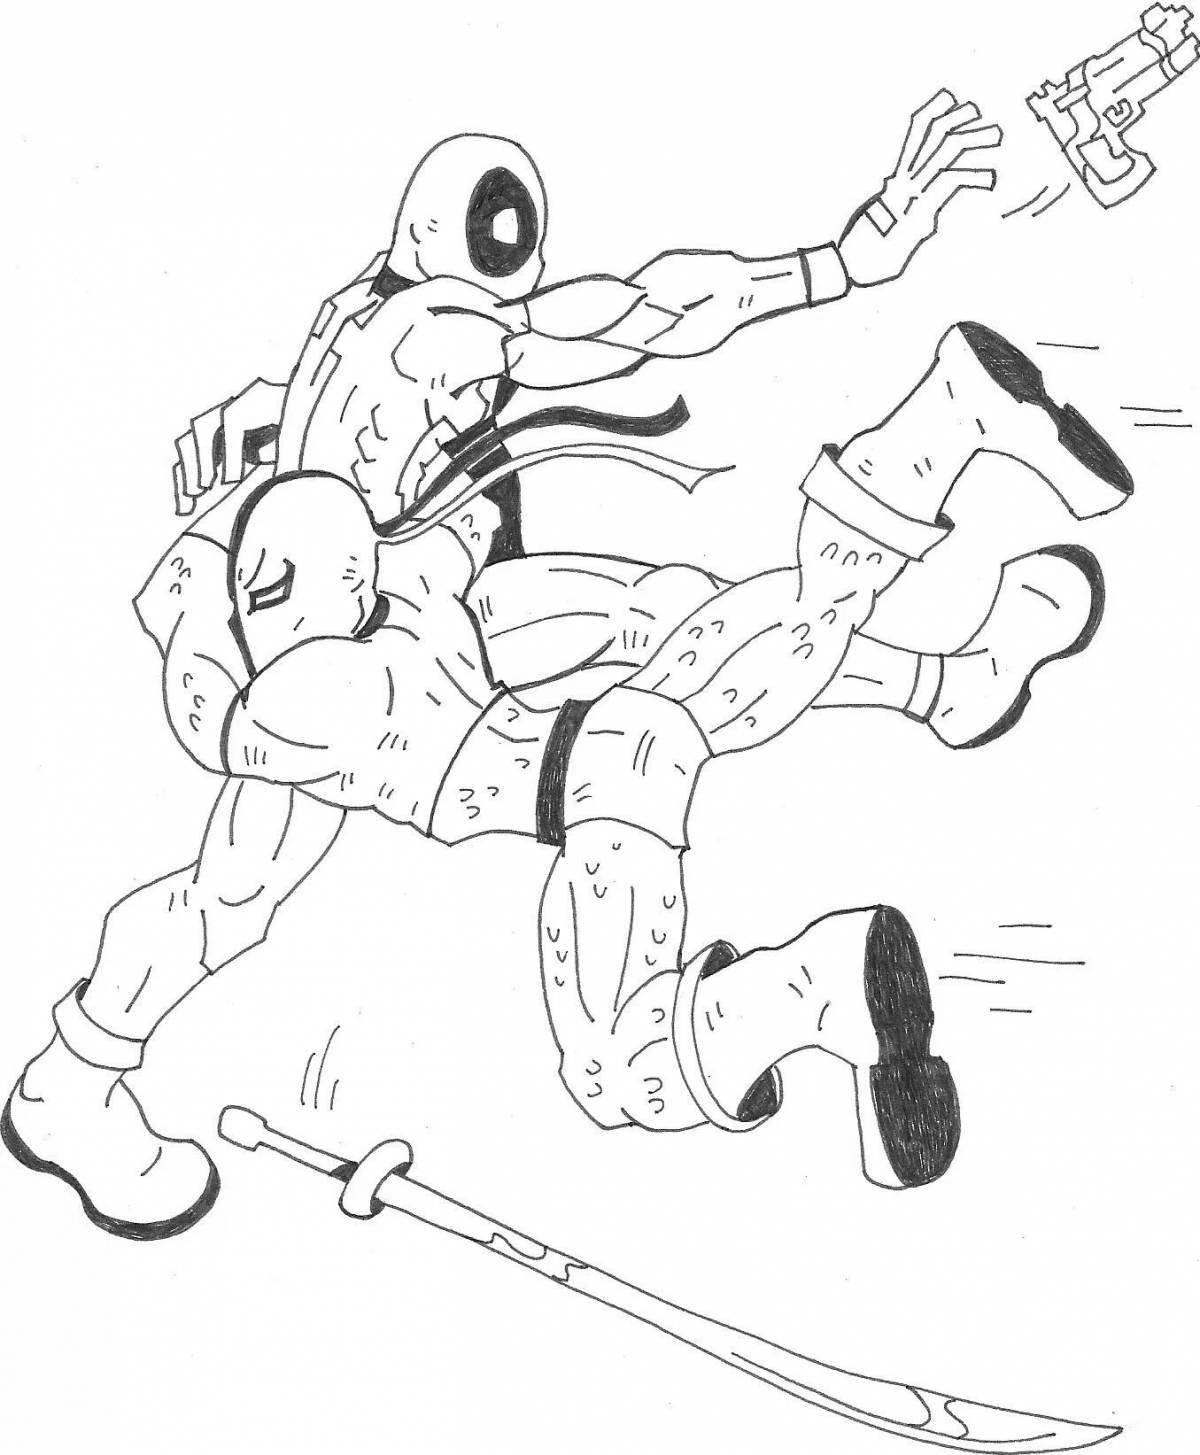 Outstanding coloring book of deadpool and spiderman for kids